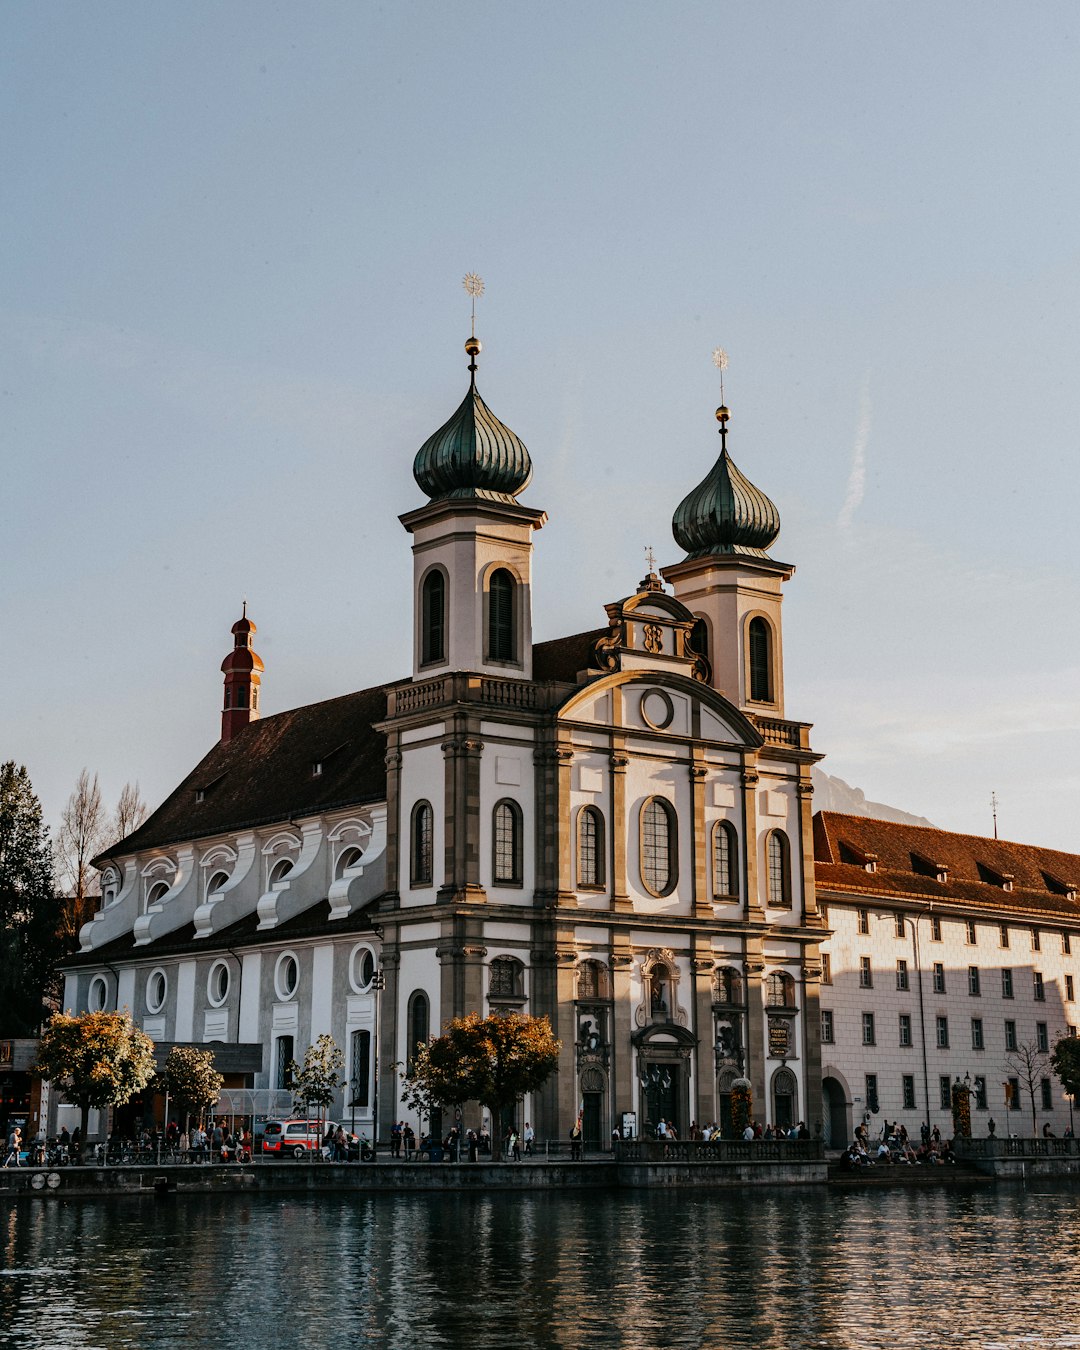 Travel Tips and Stories of Luzern in Switzerland